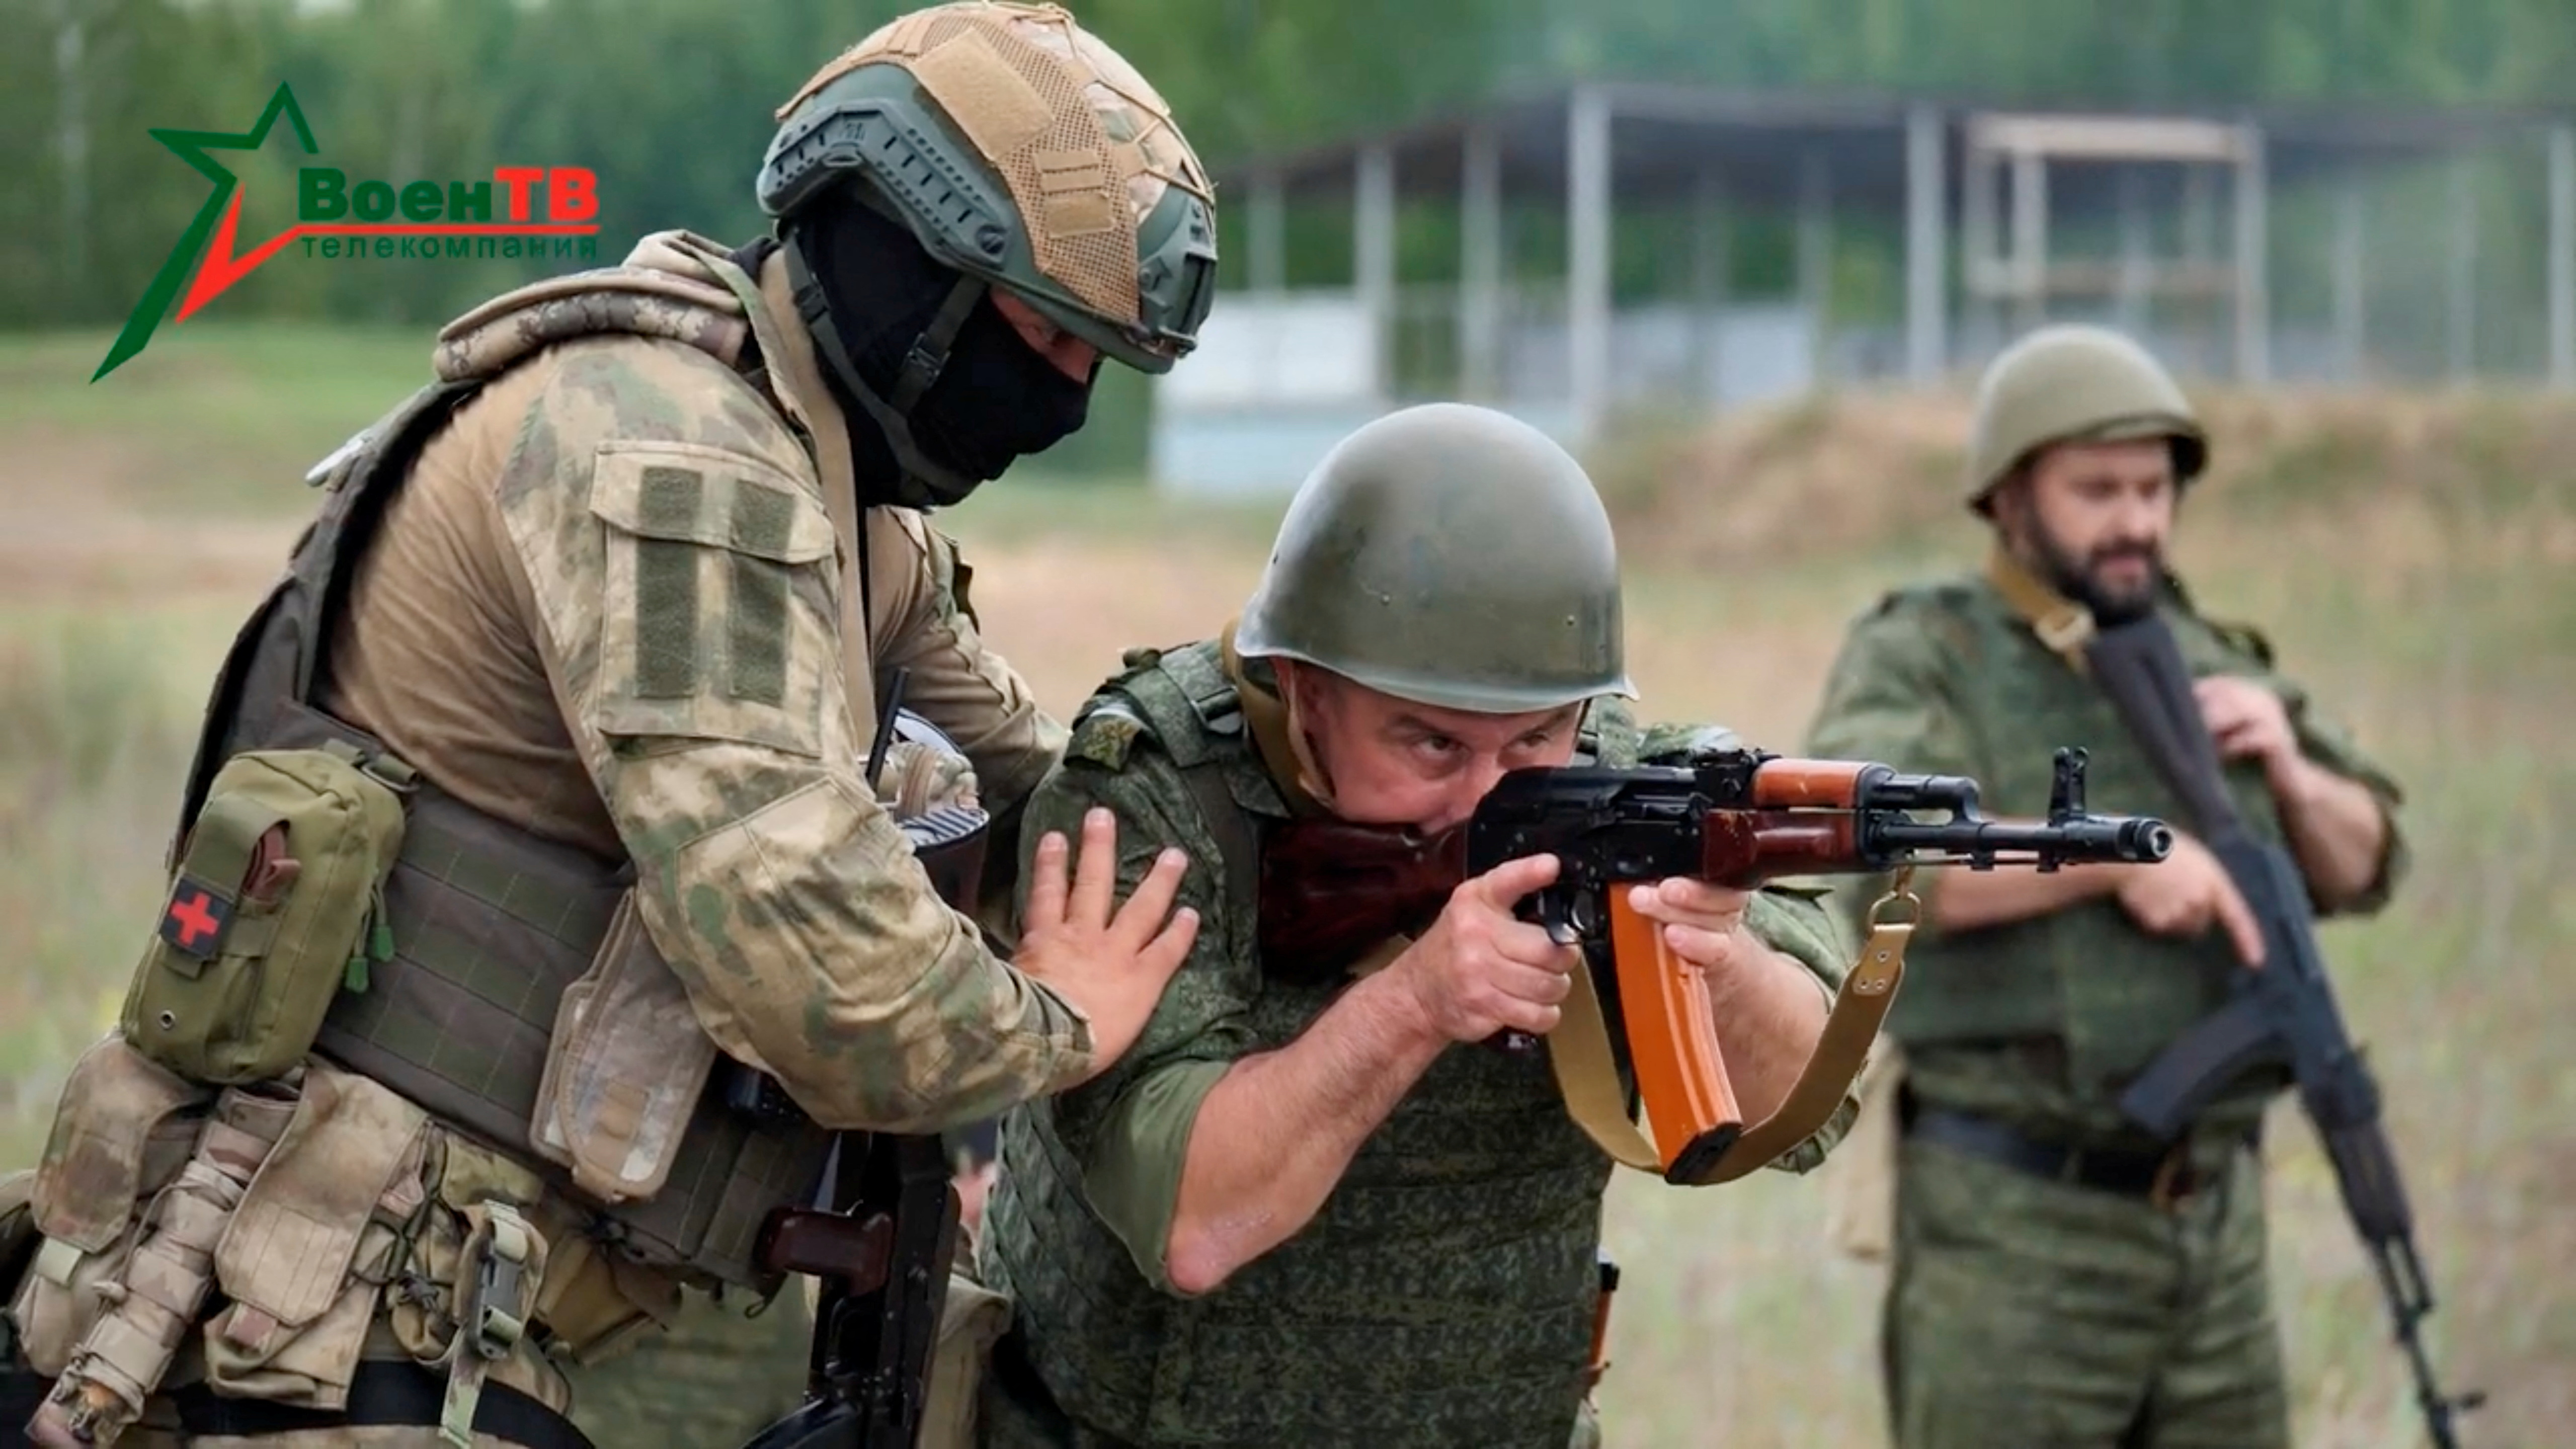 Wagner fighters are training Belarusian soldiers in Belarus